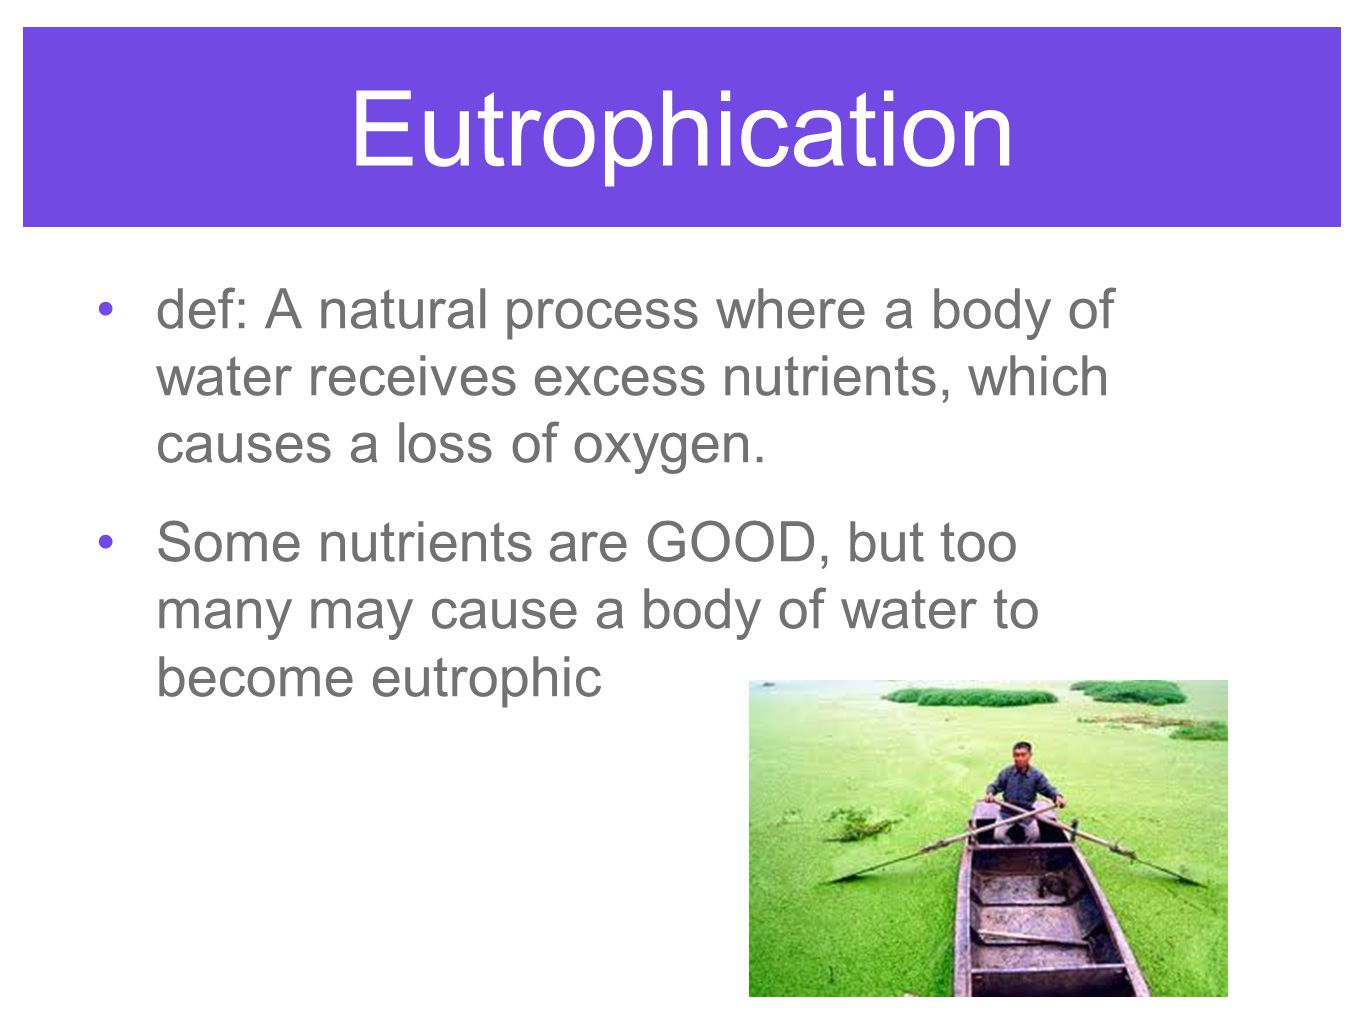 Eutrophication def: A natural process where a body of water receives excess nutrients, which causes a loss of oxygen.